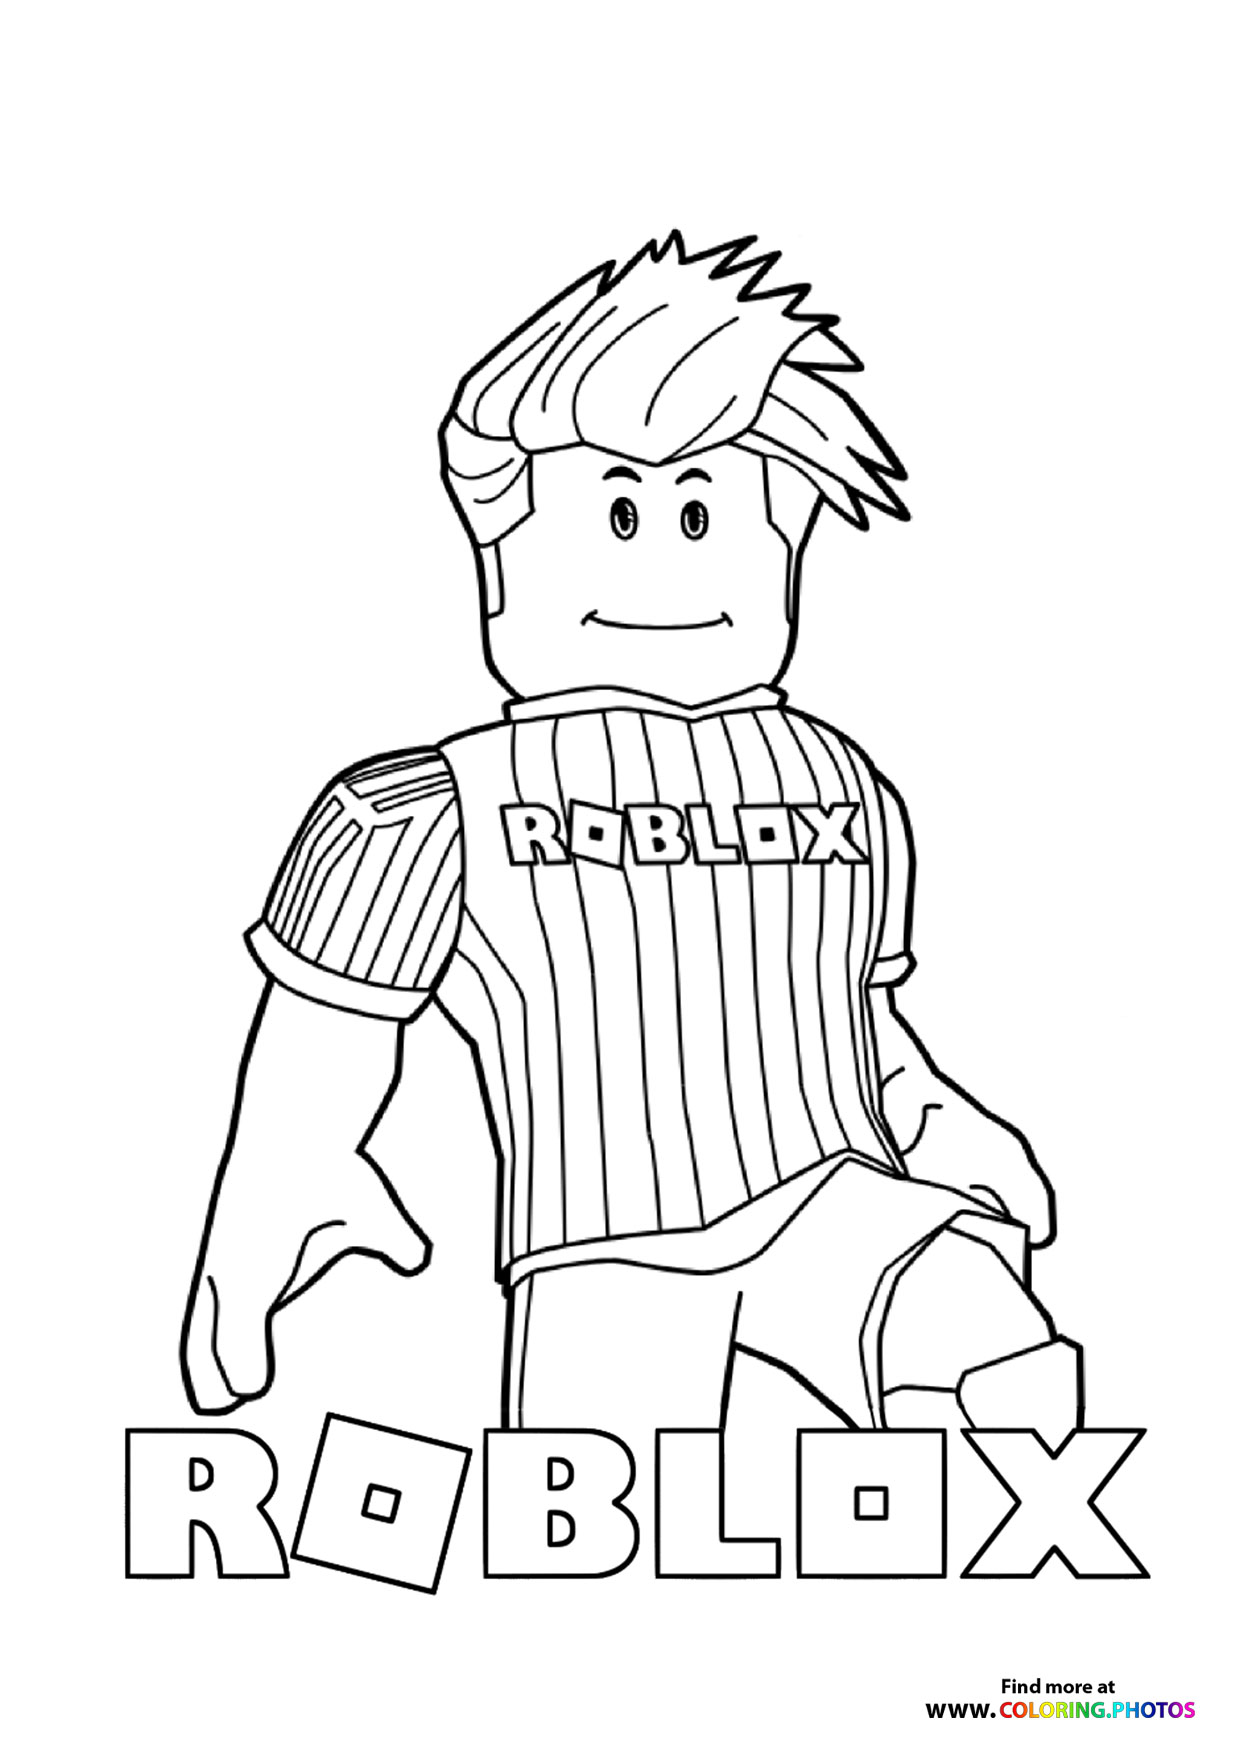 Roblox coloring pages   Free printable sheets for kids from Roblox ...